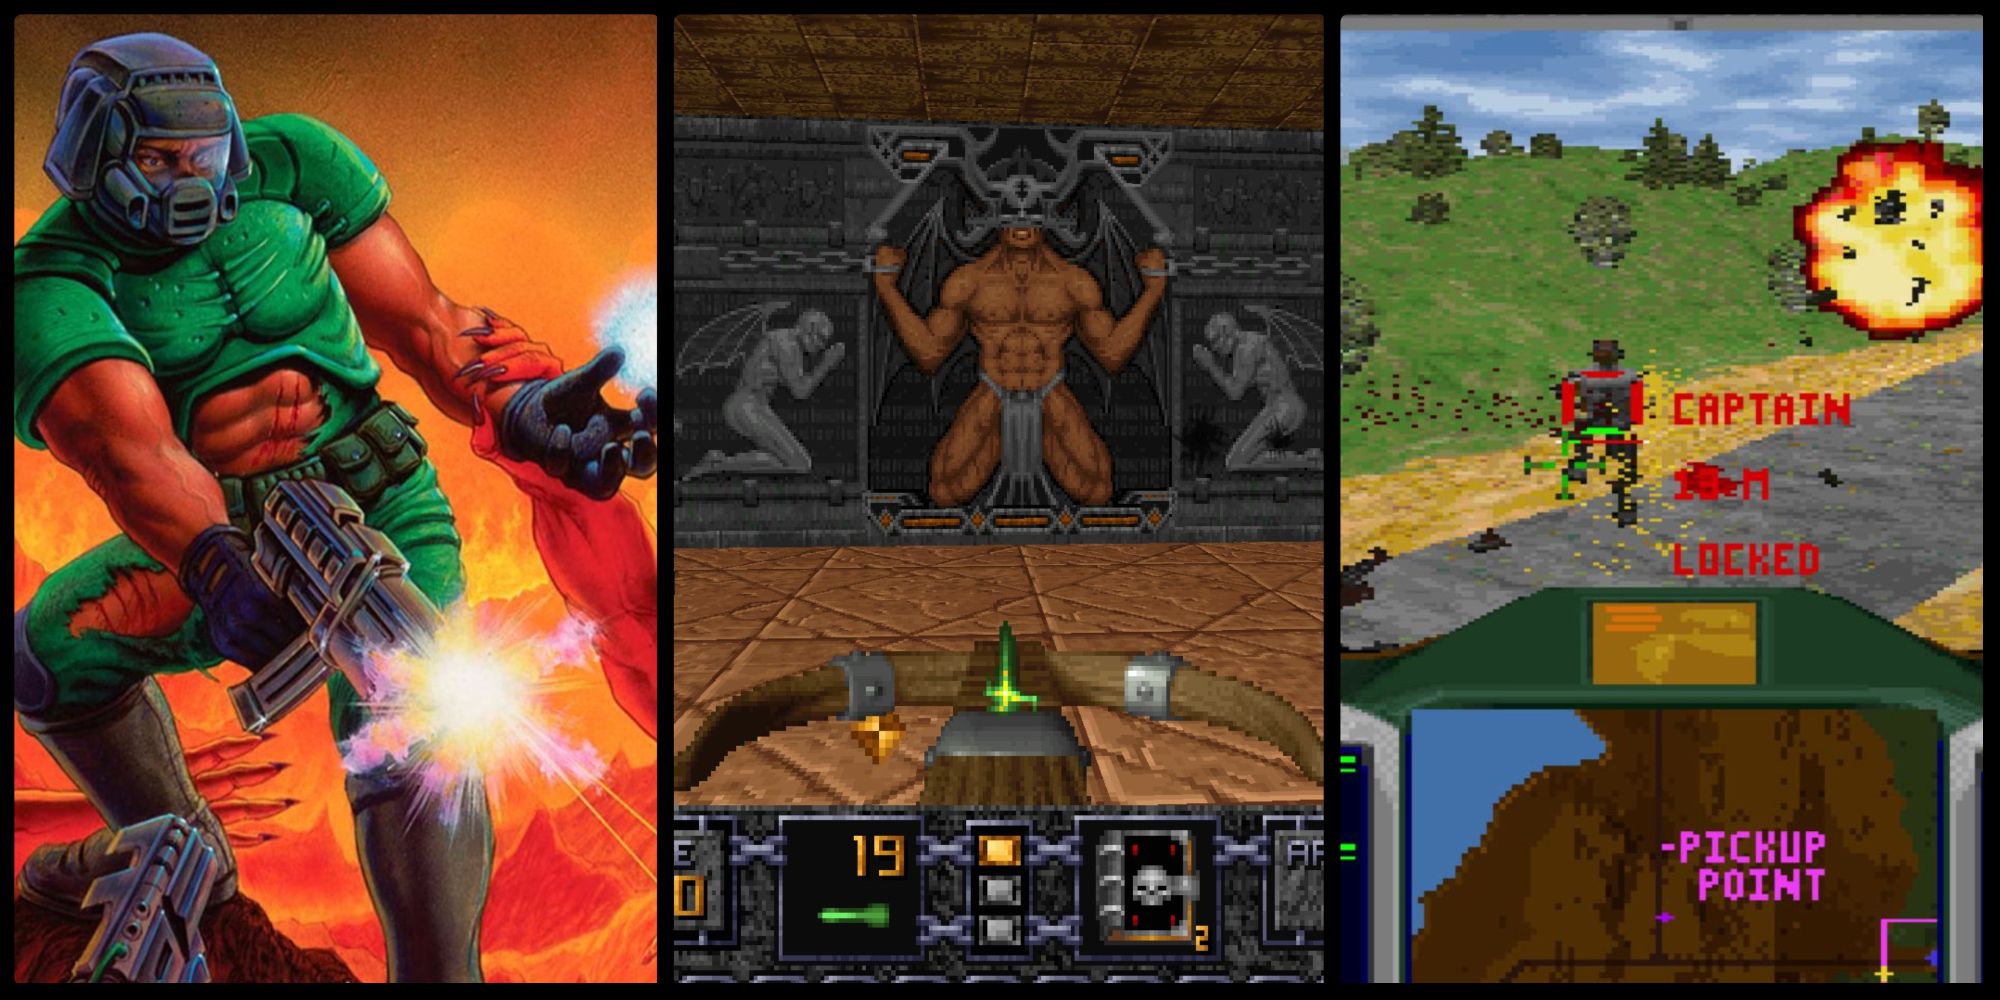 The Best MS-DOS PC Games of All Time